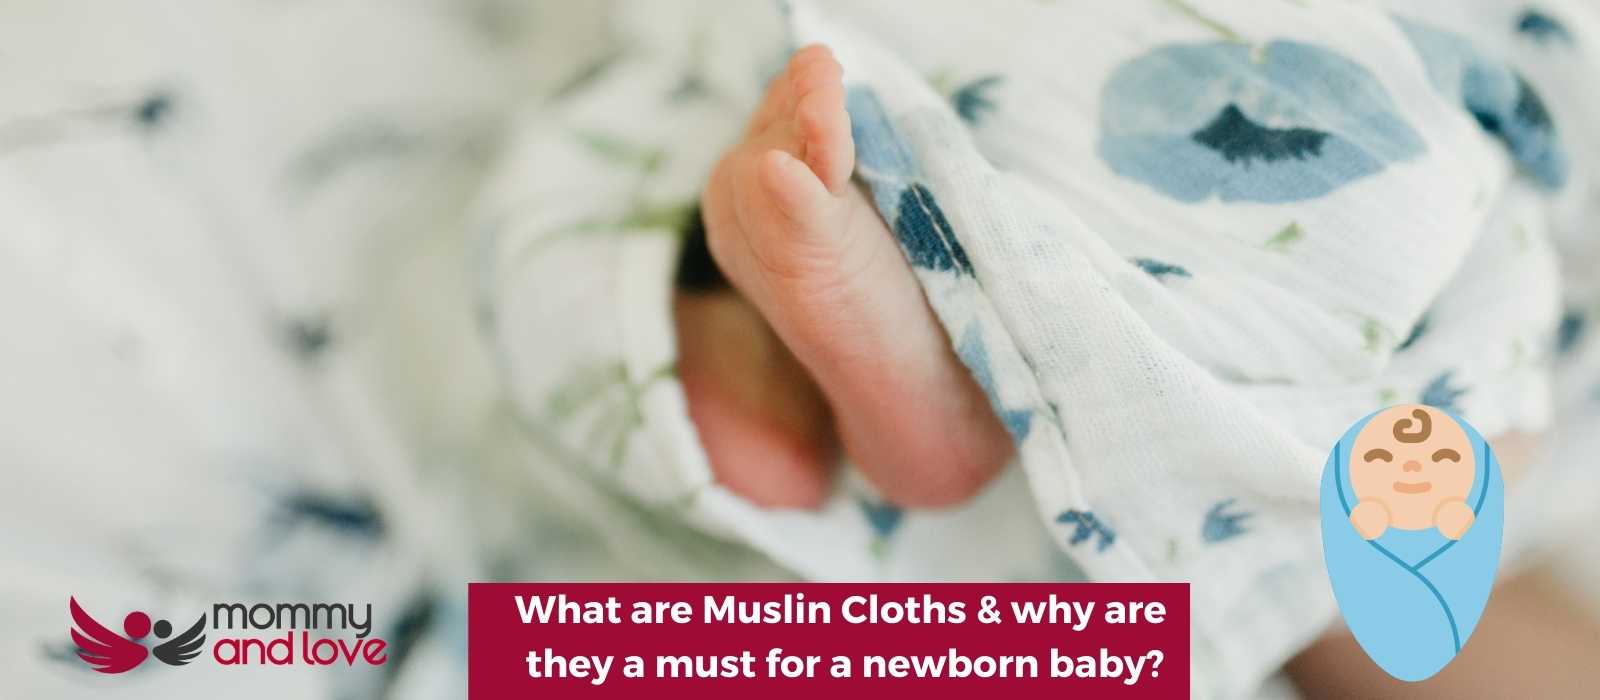 What are Muslin Cloths & why are they a must for a newborn baby